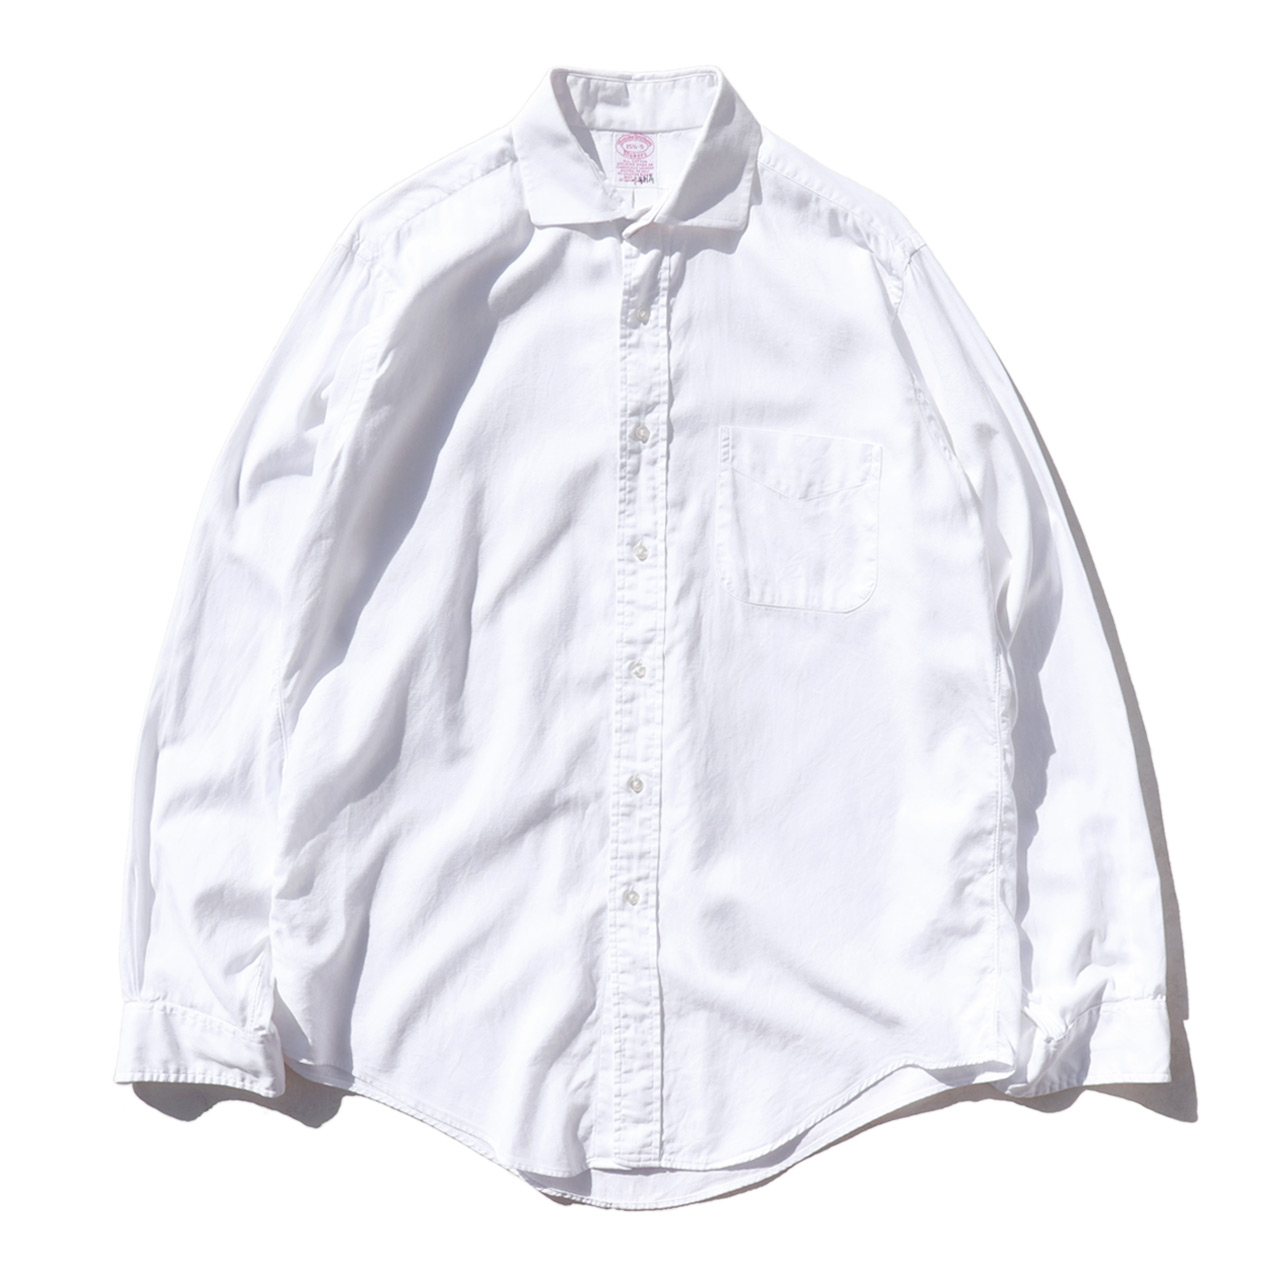 POST JUNK / 90’s BROOKS BROTHERS MAKERS White Oxford Horizontal Collar